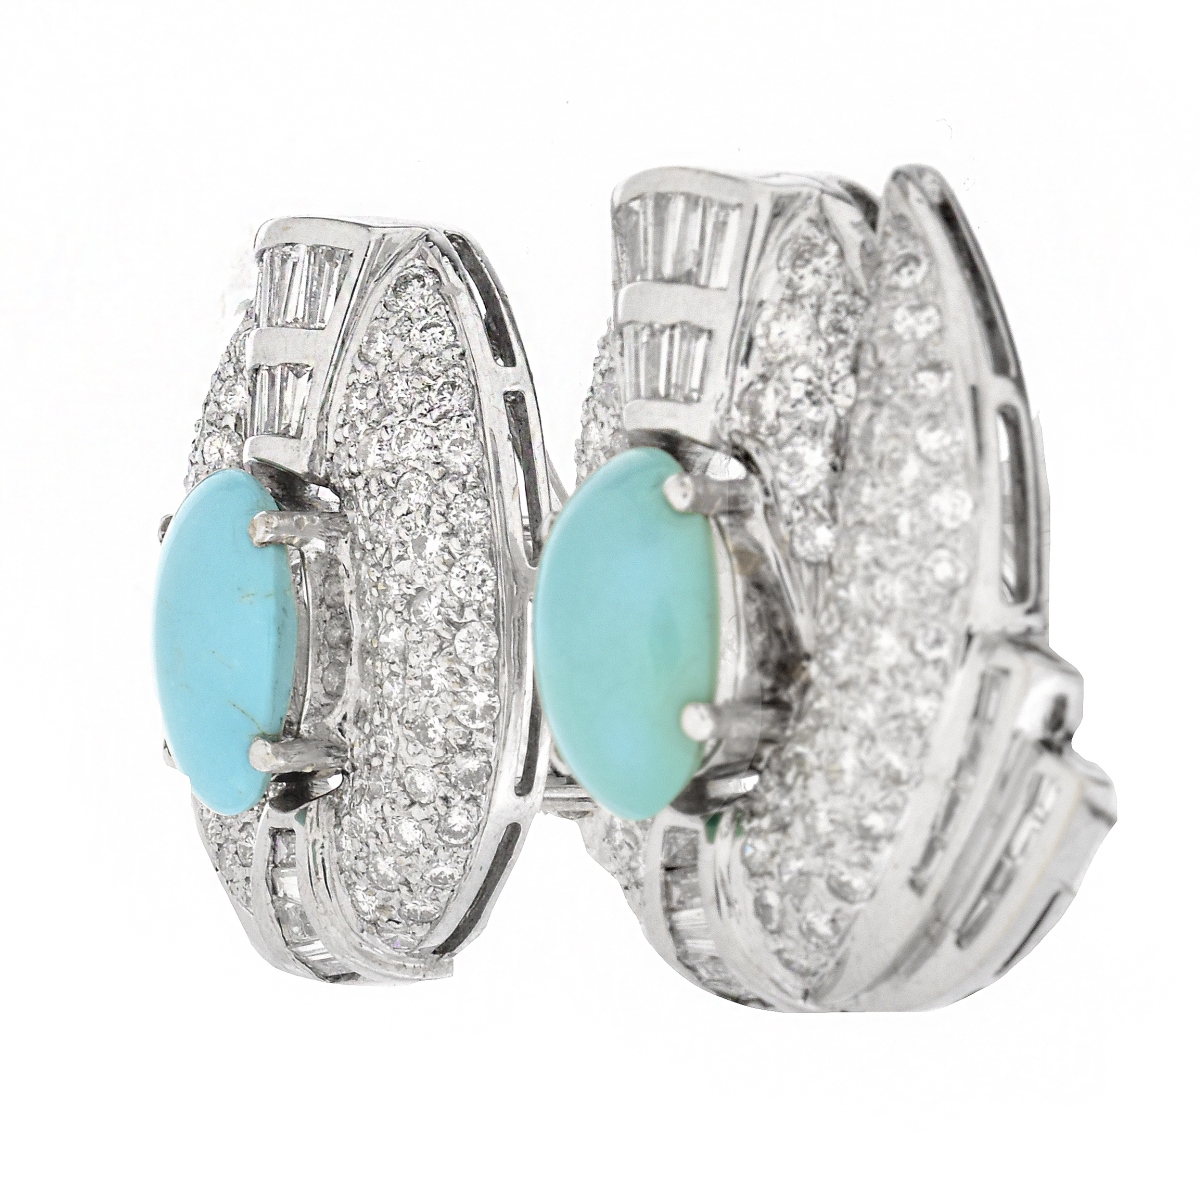 Diamond, Turquoise and 18K Gold Earrings